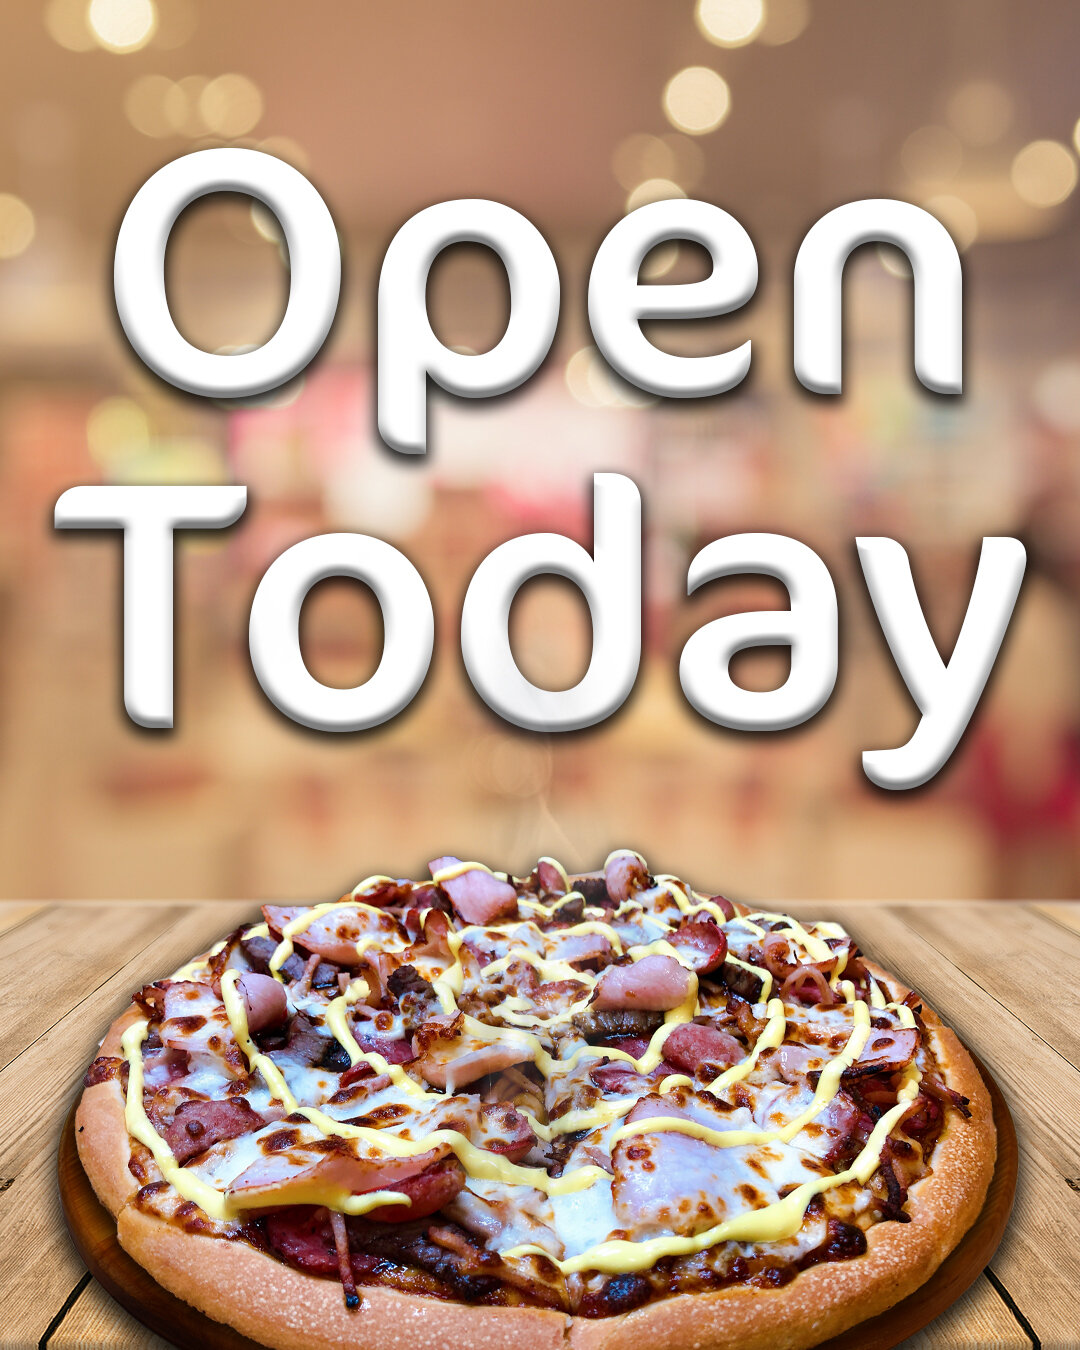 We're baaaack! Open from 4pm today!

We hope you all had a wonderful Christmas and New Year's with family and friends. The Pizza Plus crew is all rested up and ready to go for a big 2023, and we're excited to see you in store soon 💚🍕

Get your feed